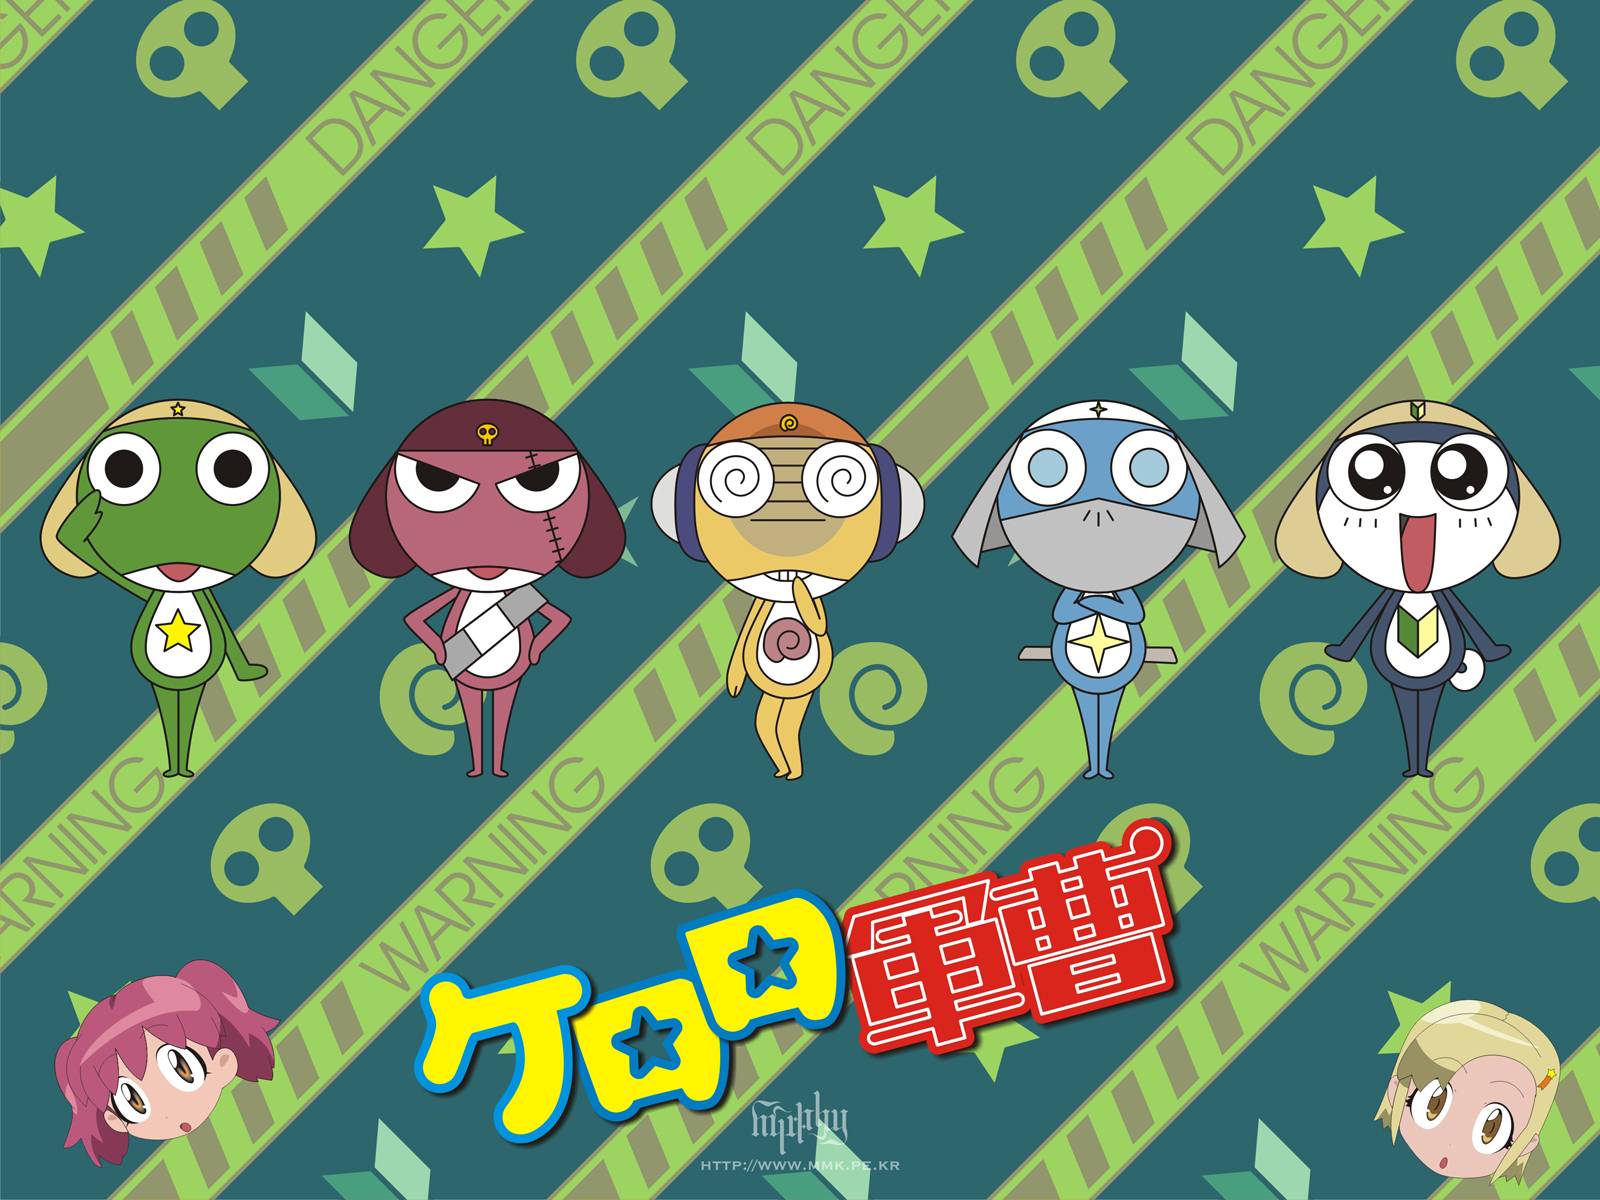 Gallery For gt Sgt Frog Characters